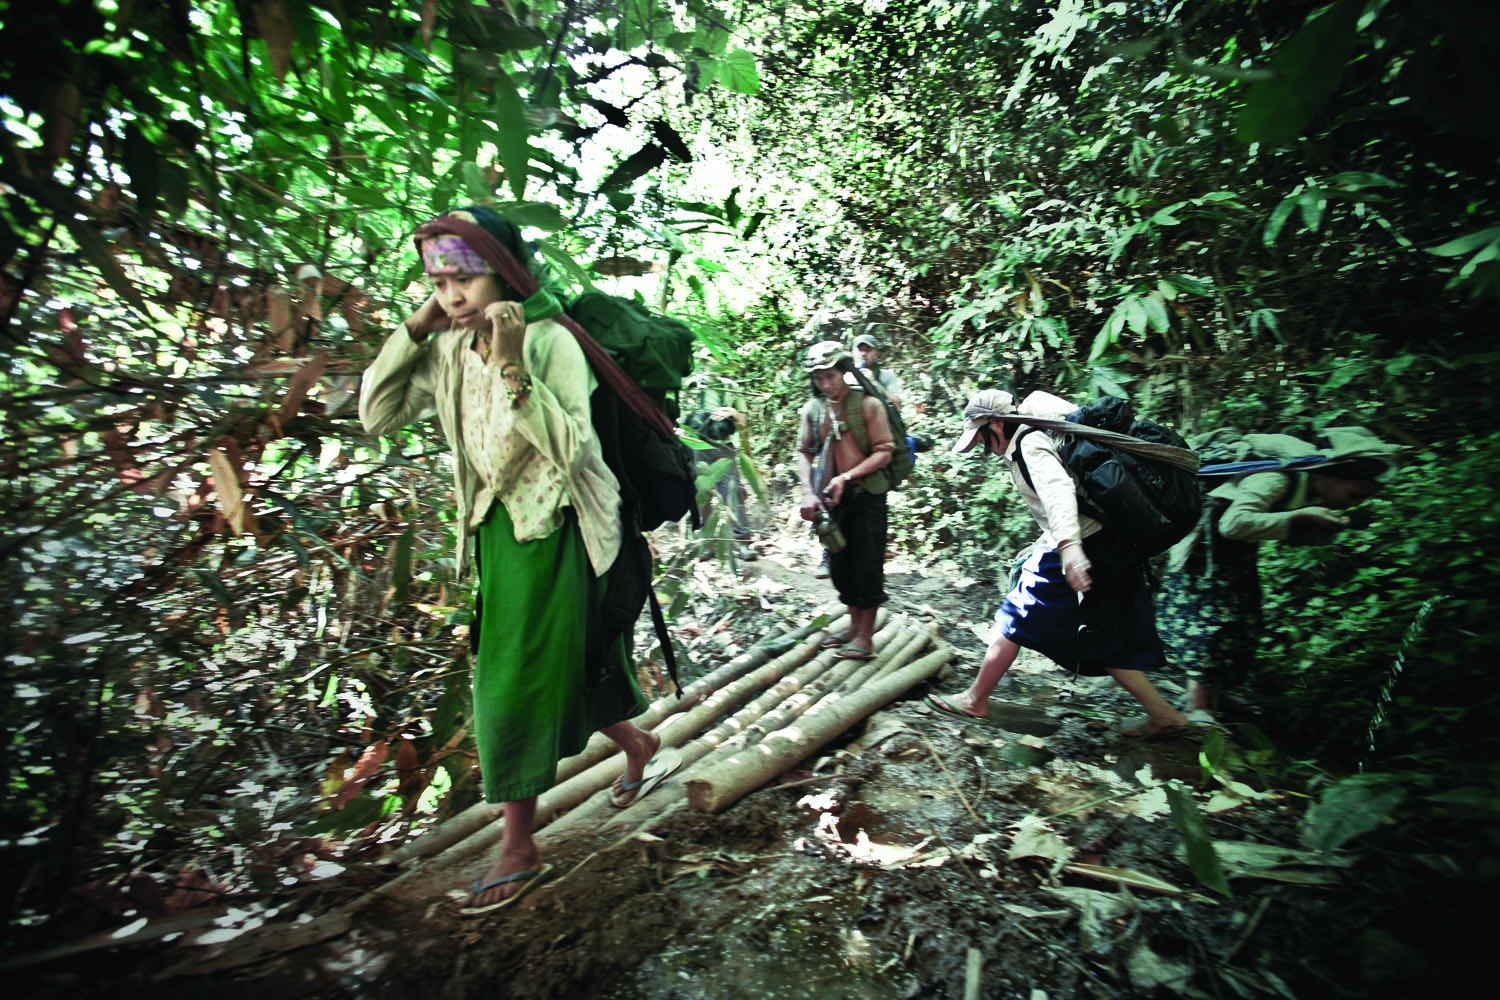 Most villages within Karen state are only accessible through a network of jungle paths. Supplies are carried in by  porters, many of them  young women who carry up to fifty pounds up and down steep mountain routes. Medical supplies, as well as basic necessities, are smuggled in from Thailand then trekked to remote villages.